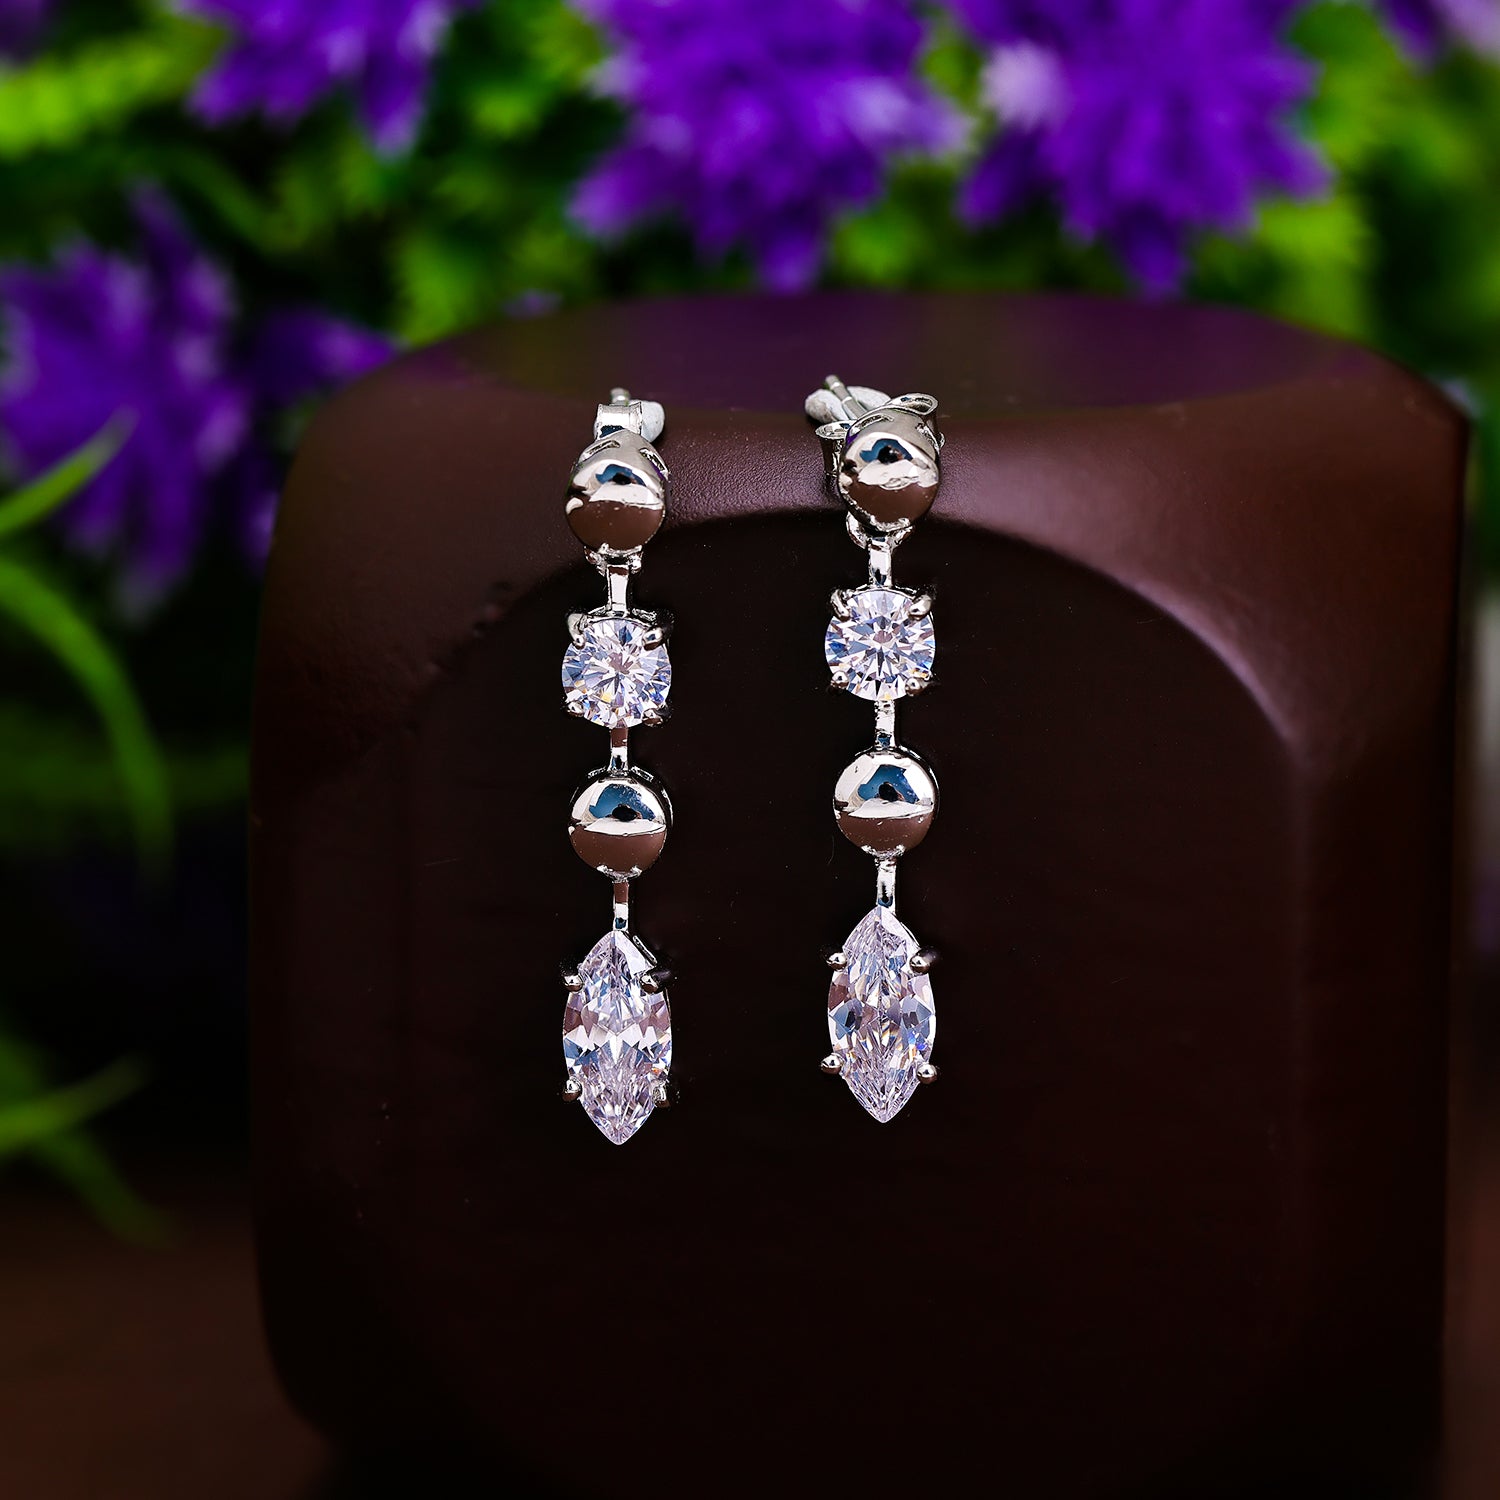 Buy GIVA 925 Sterling Silver Zircon Earrings Online At Best Price  Tata  CLiQ